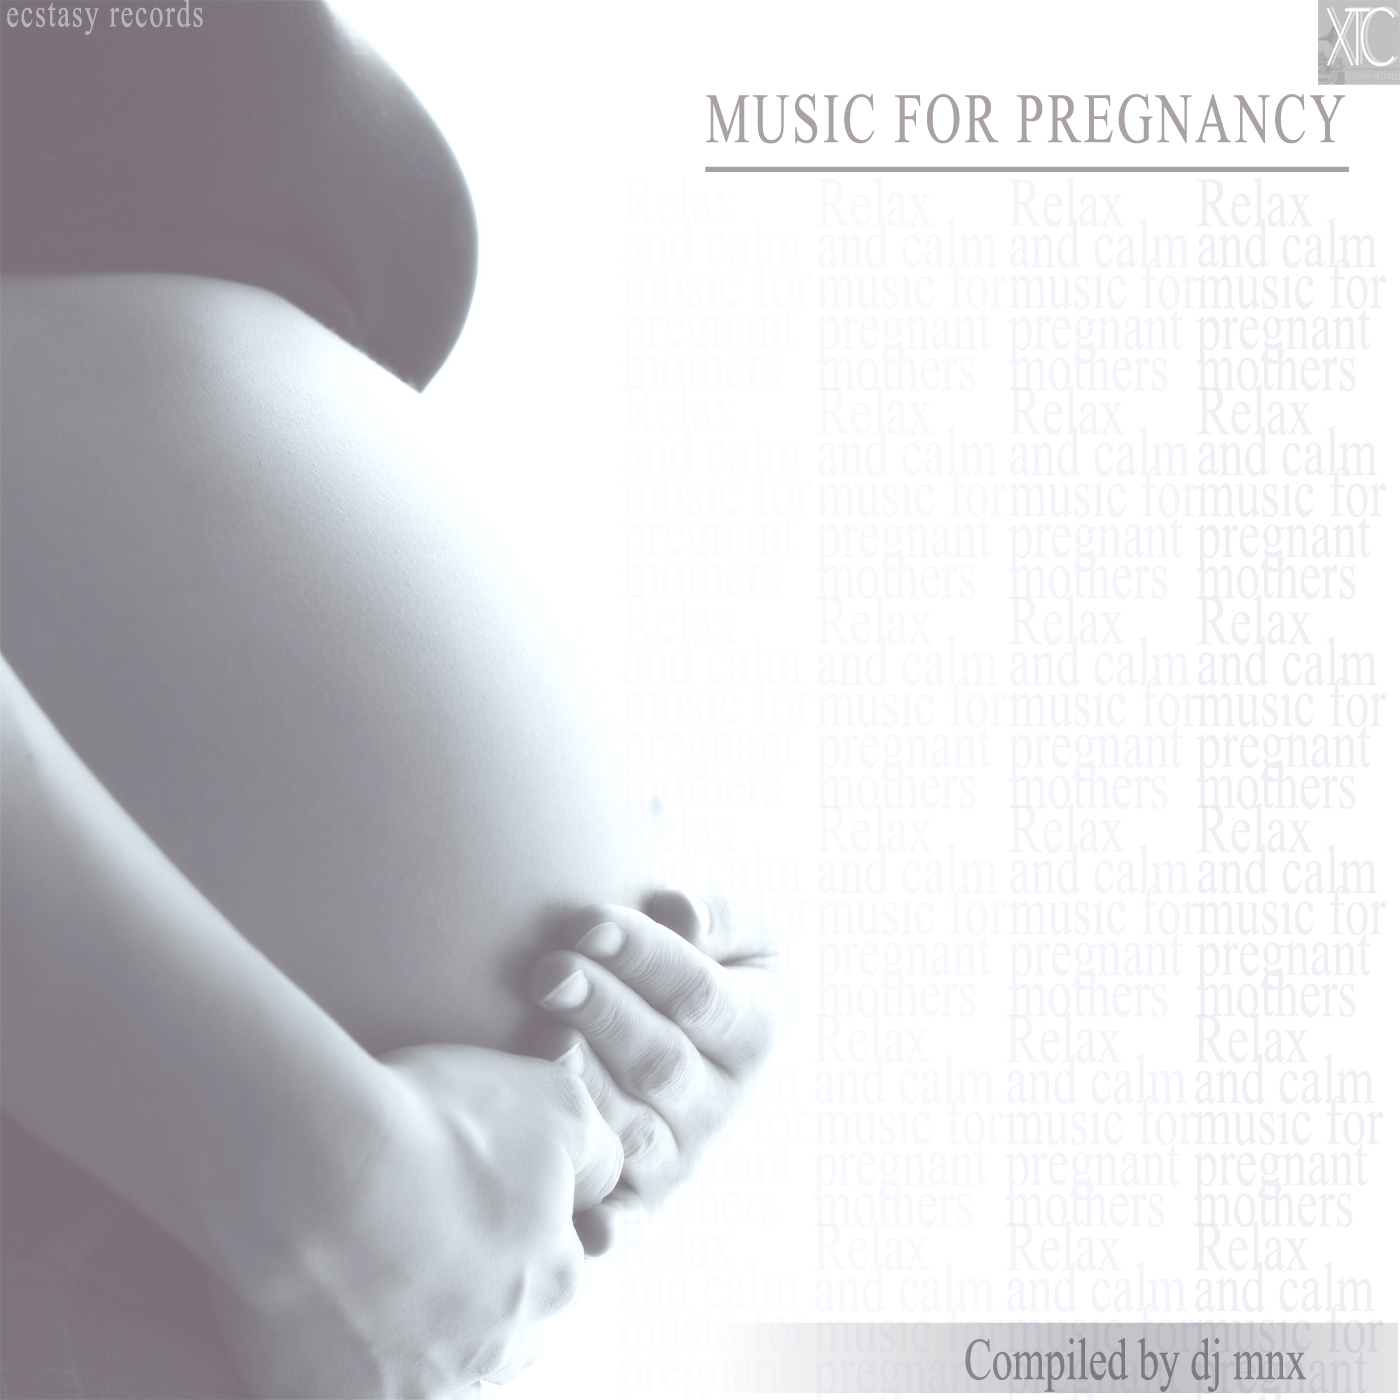 Music for Pregnancy (Relax and Calm Music for Pregnant Mothers Compiled by DJ MNX)